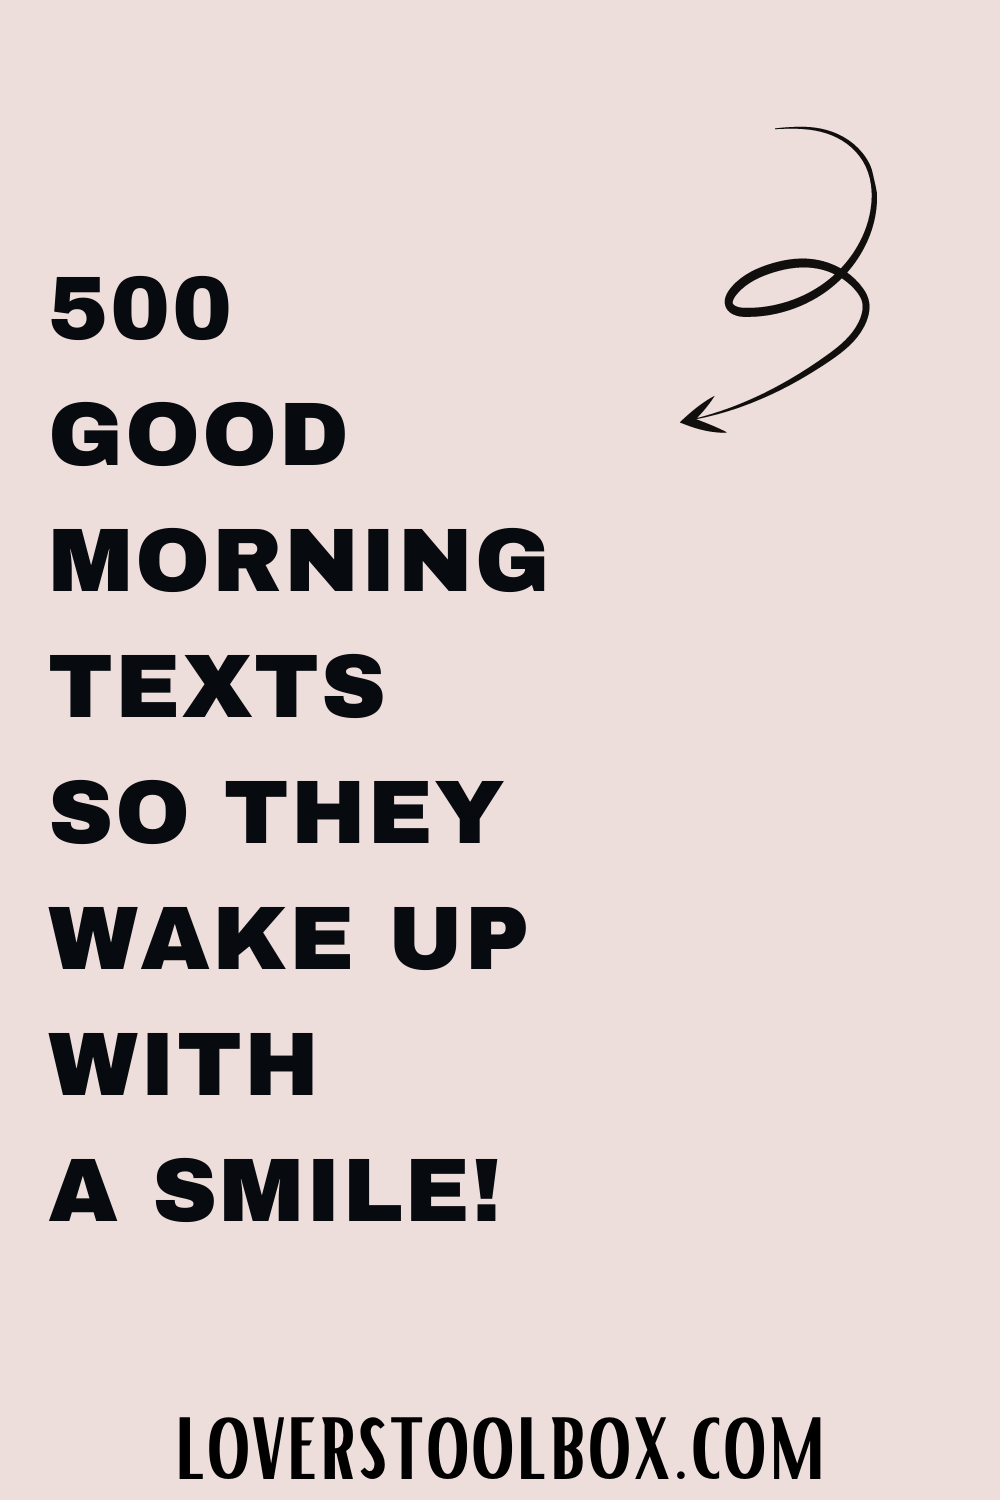 500 Good Morning Love Messages To Brighten His Or Her Day - Lovers Toolbox